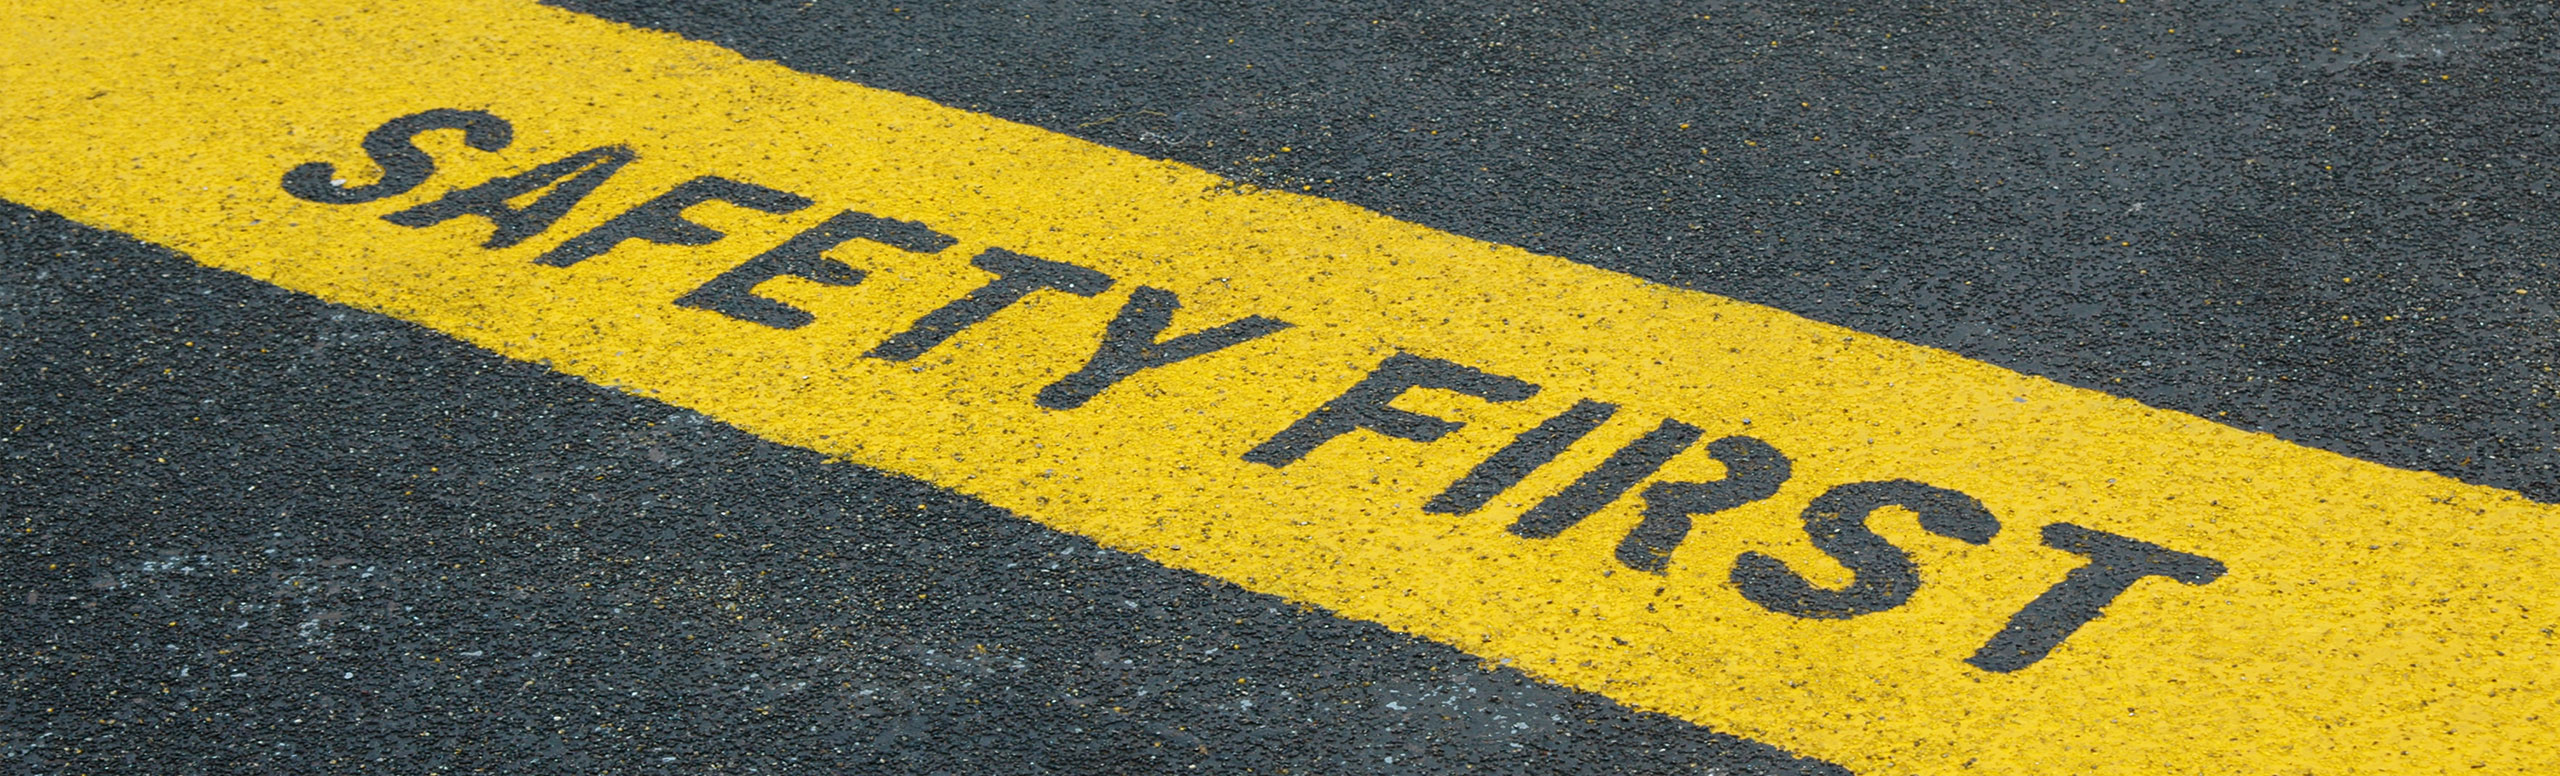 Pavement with yellow strip with “safety first” outlined